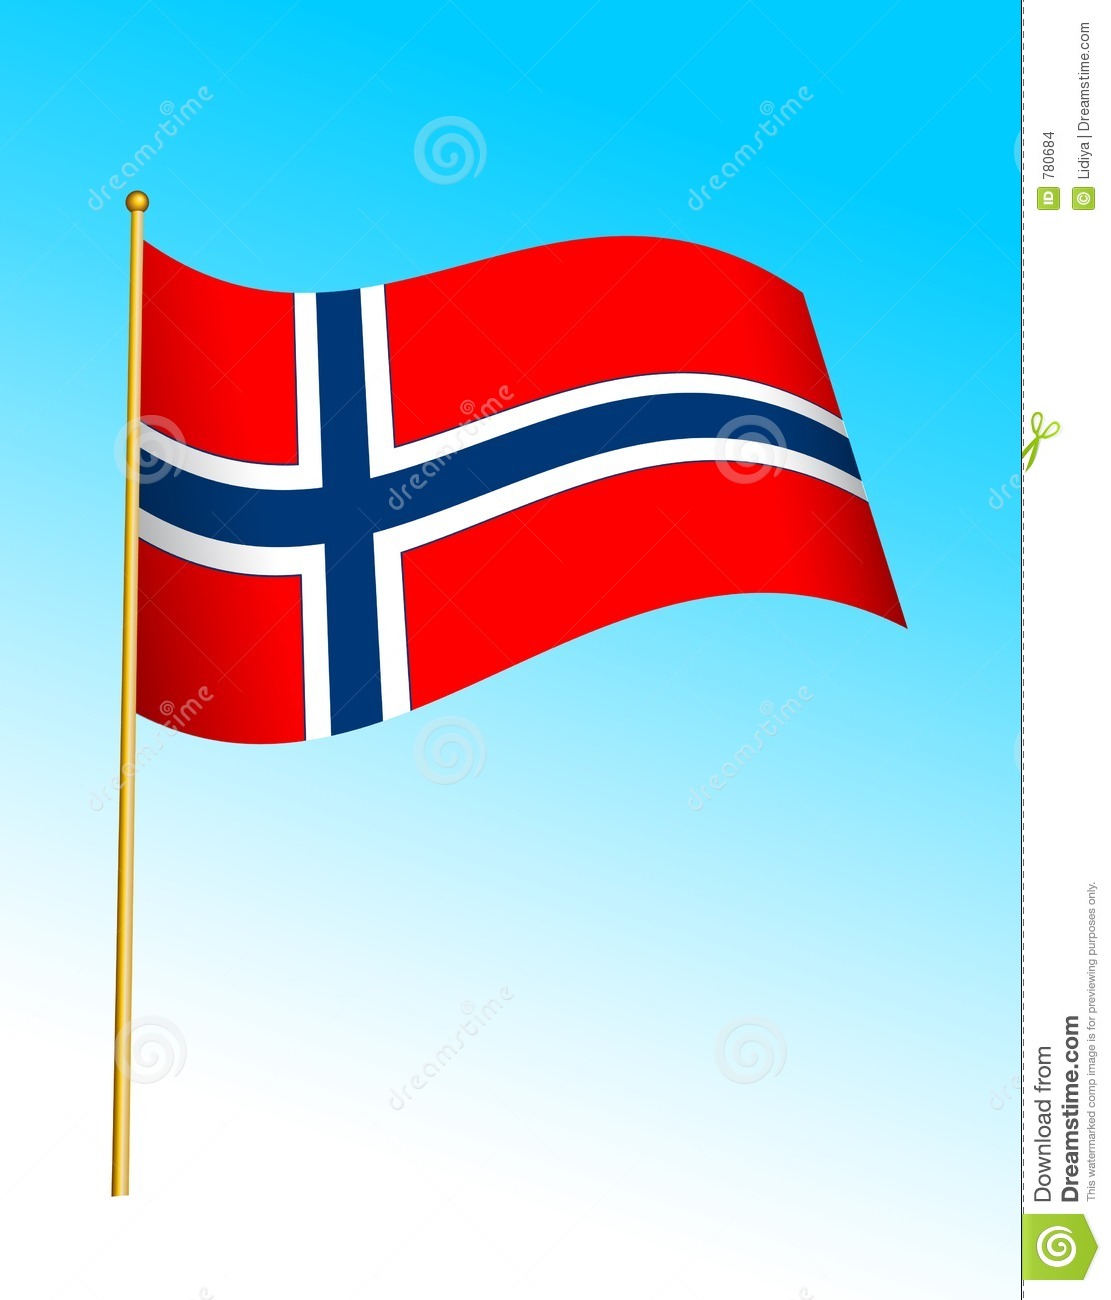 Flag   Norway 2 Stock Images   Image  780684